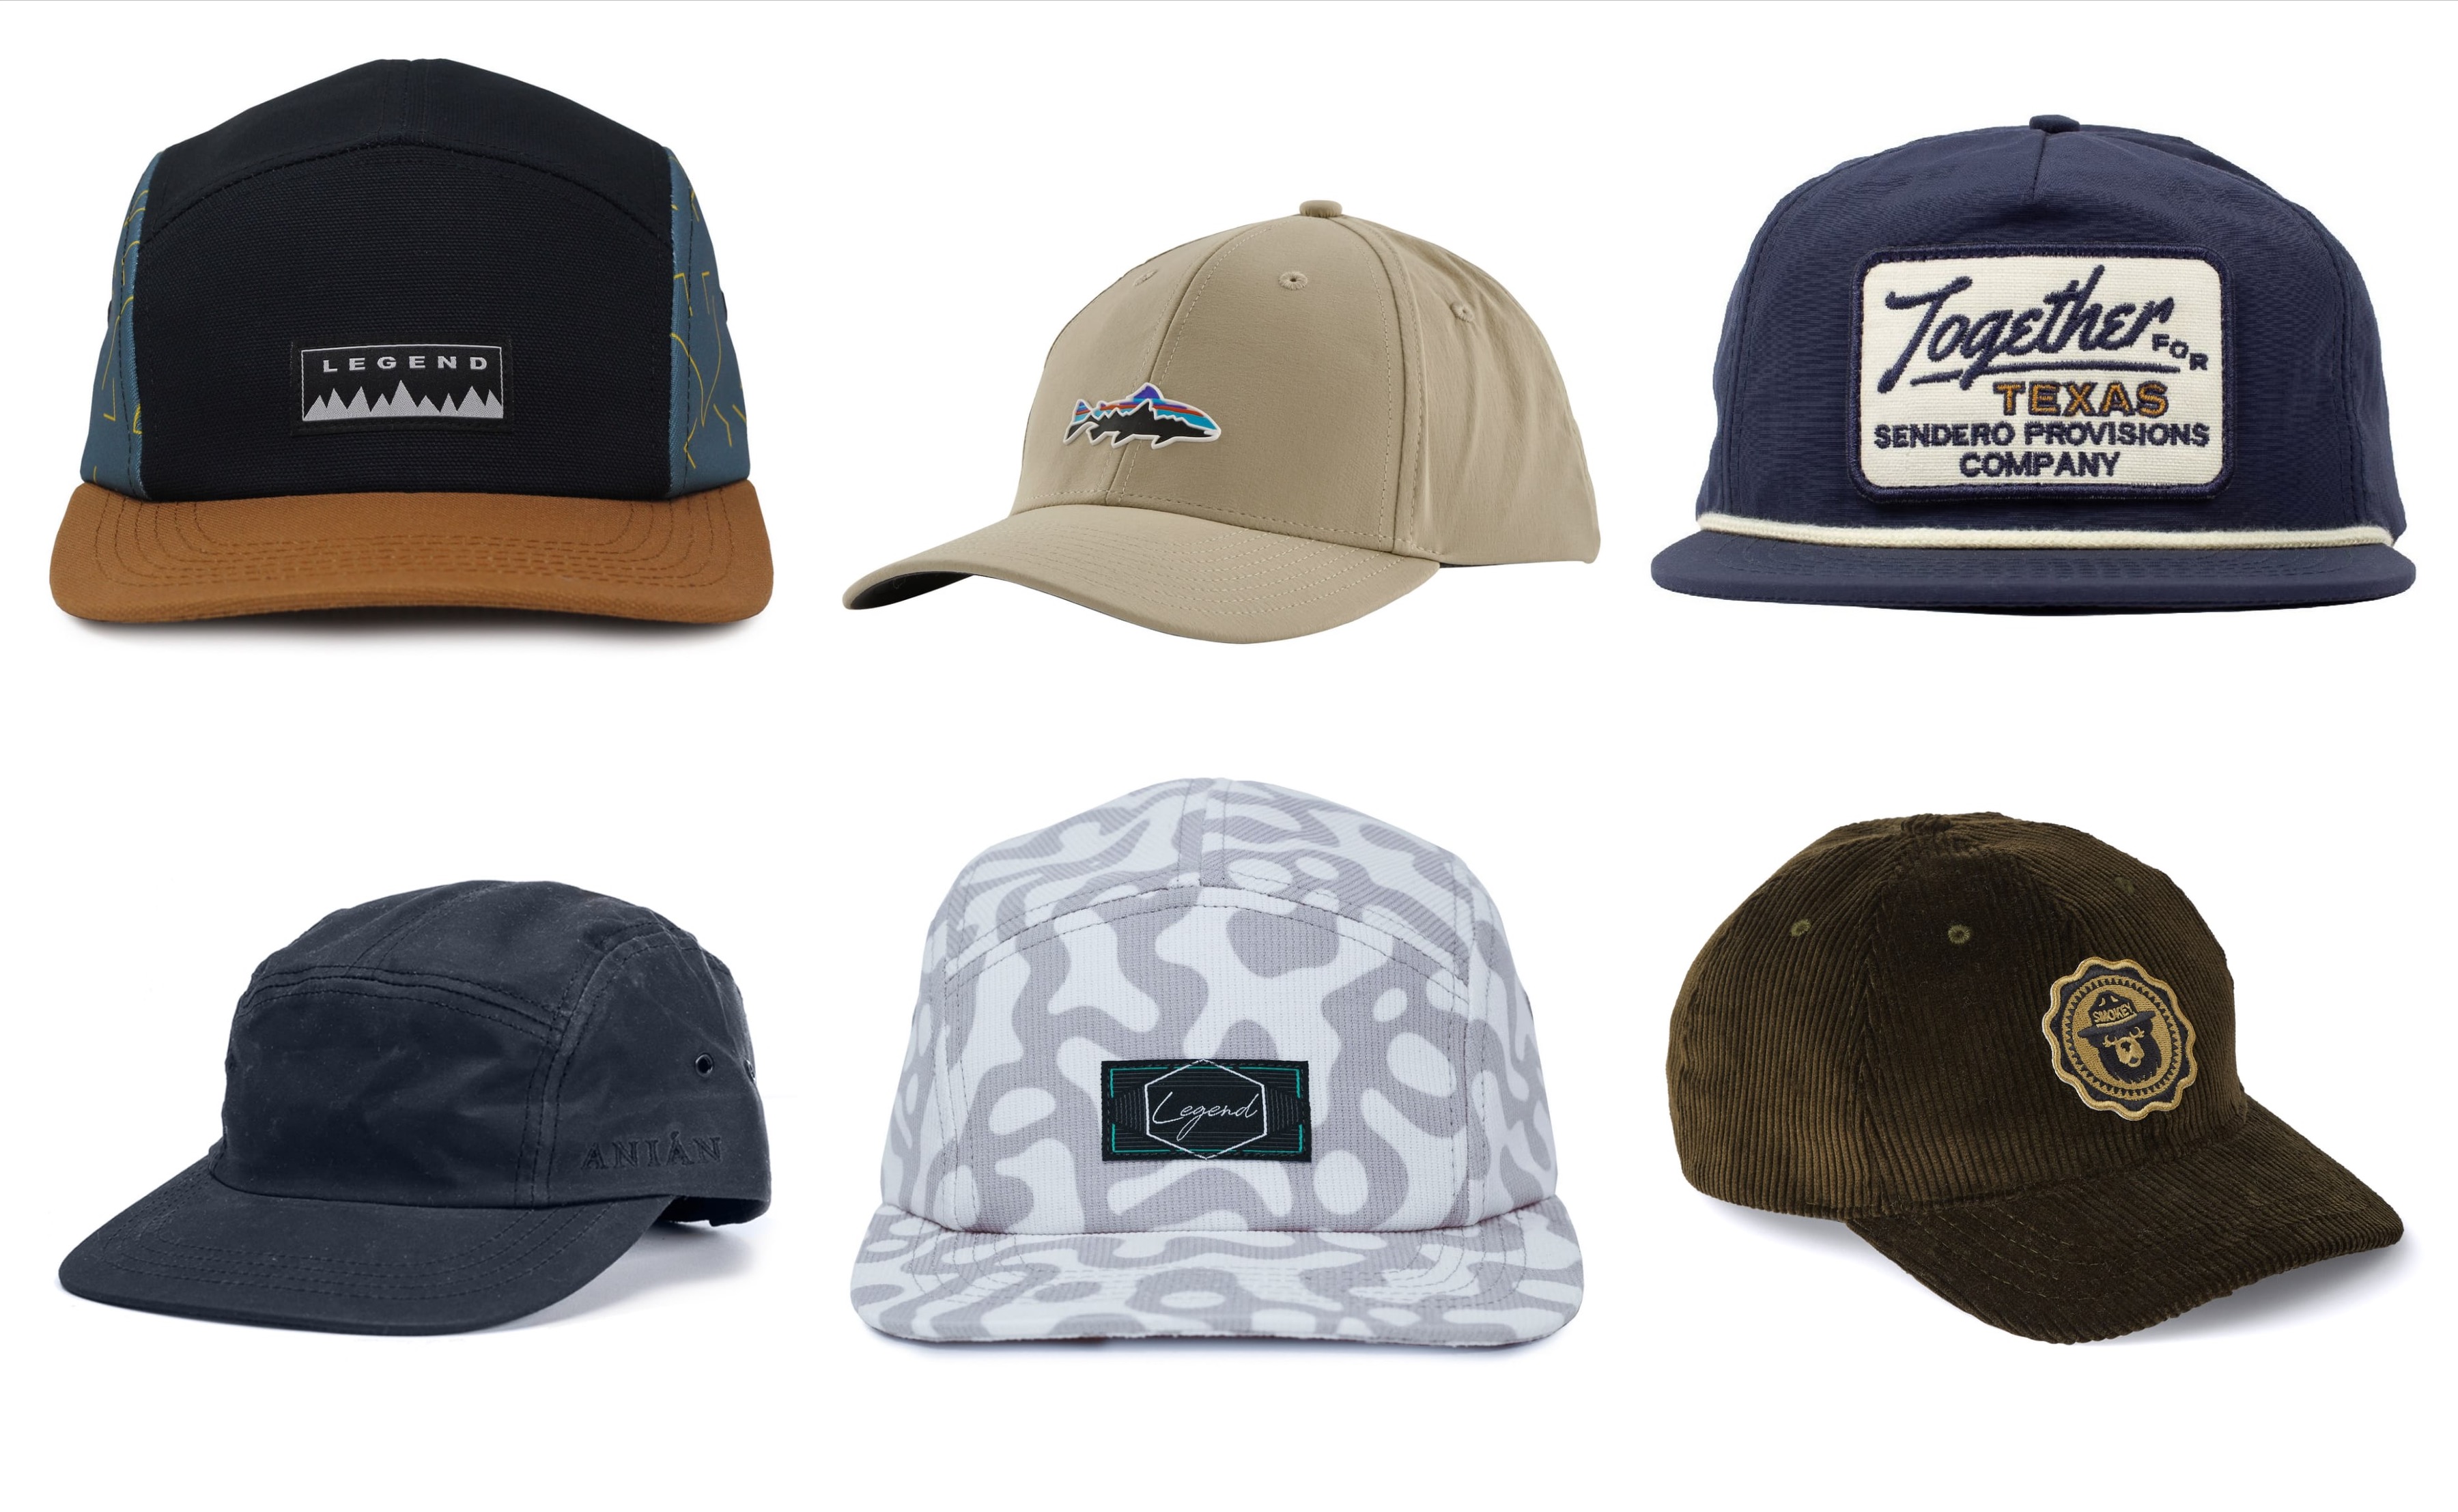 Best New Hats For Bros Looking To Beat The Summer Sun In Style - BroBible